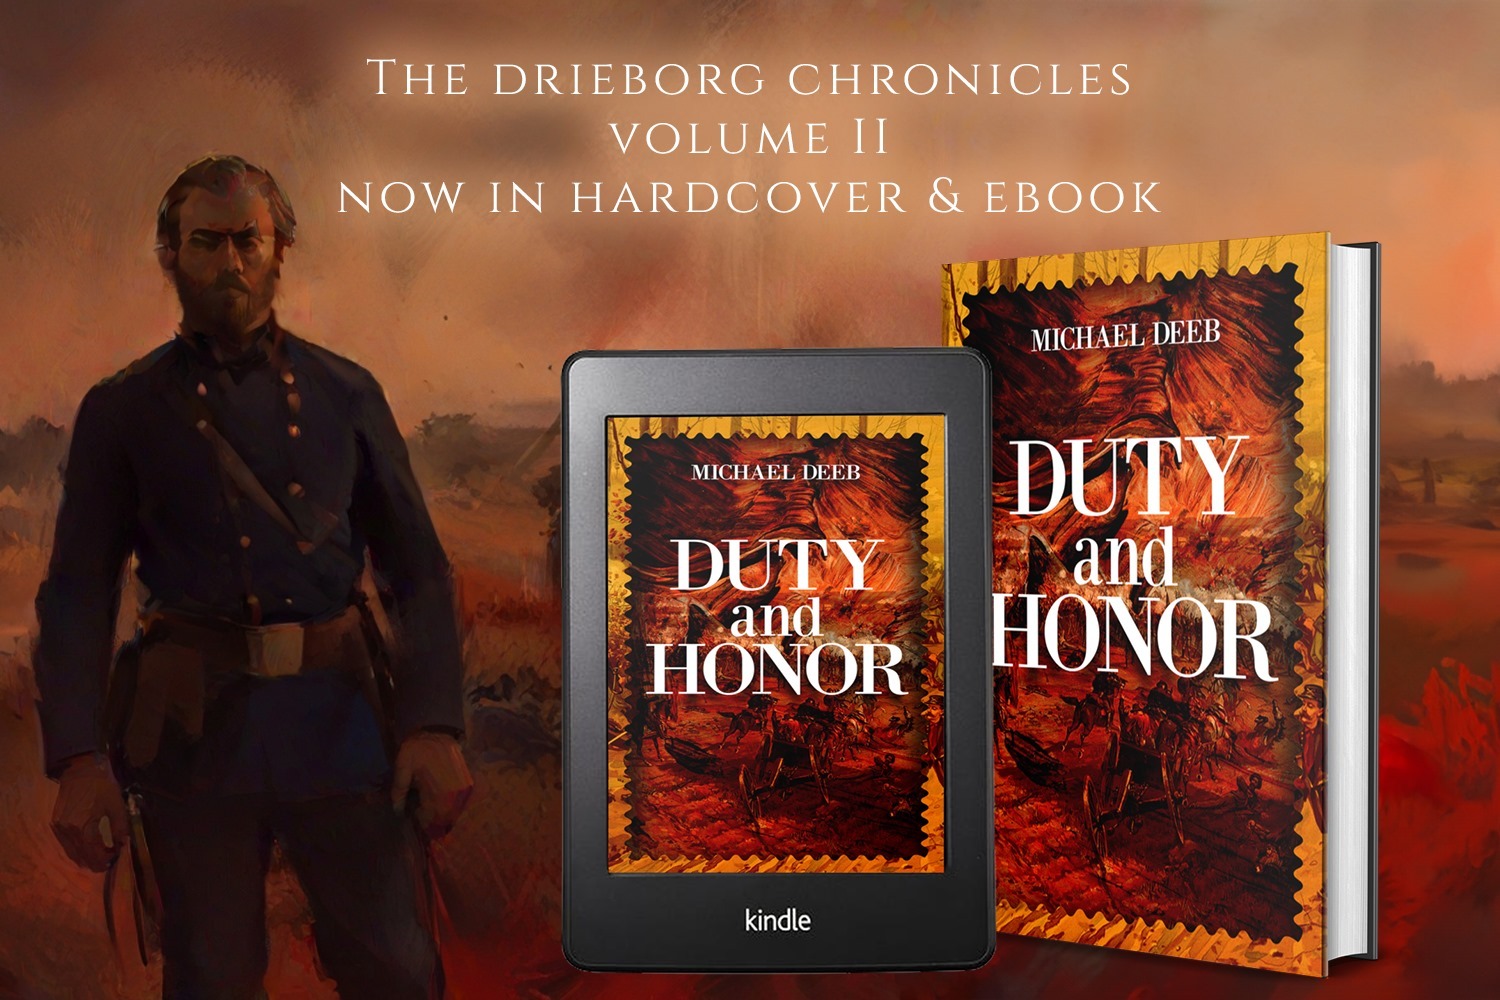 Duty and Honor (The Drieborg Chronicles Book 2)  by Michael Deeb, now available from Histria Books